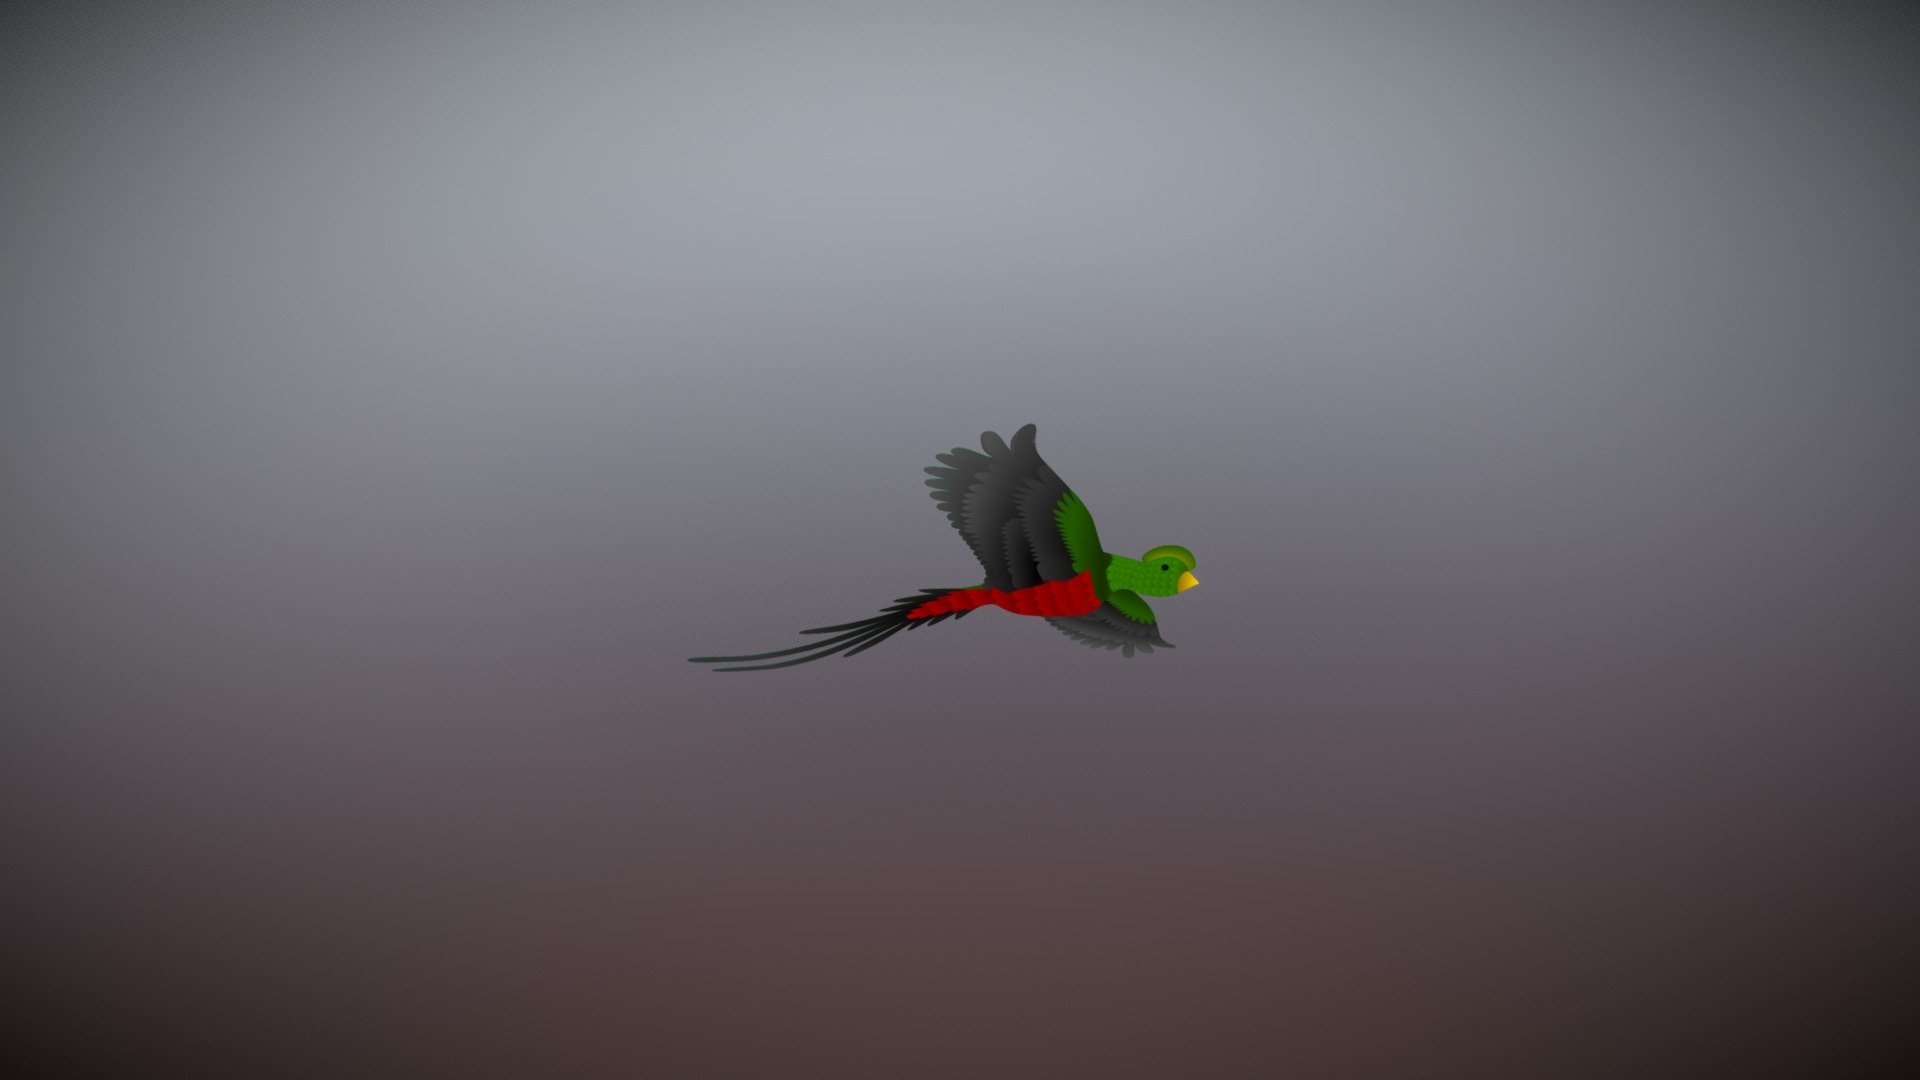 Rigg: simple, IK
Modelo/model: low poly
Material: UV
Animacion/animation: vuelo/flying
Video 360 http://youtu.be/p2isy58_mtA - Quetzal-2013mr07 - 3D model by GenX 3d model